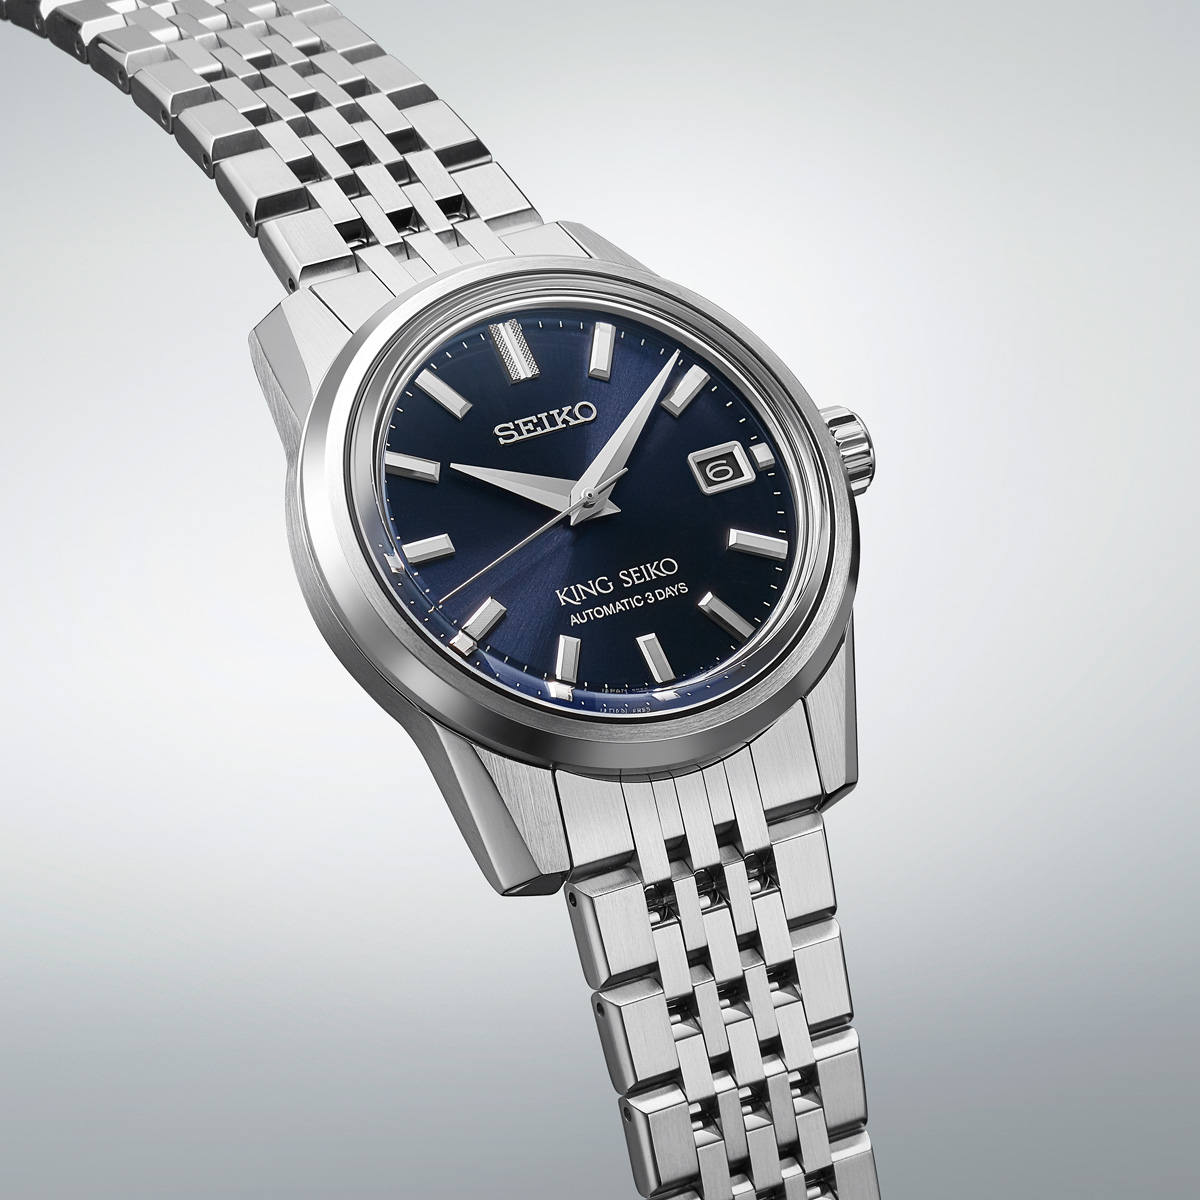 The new King Seiko collection -